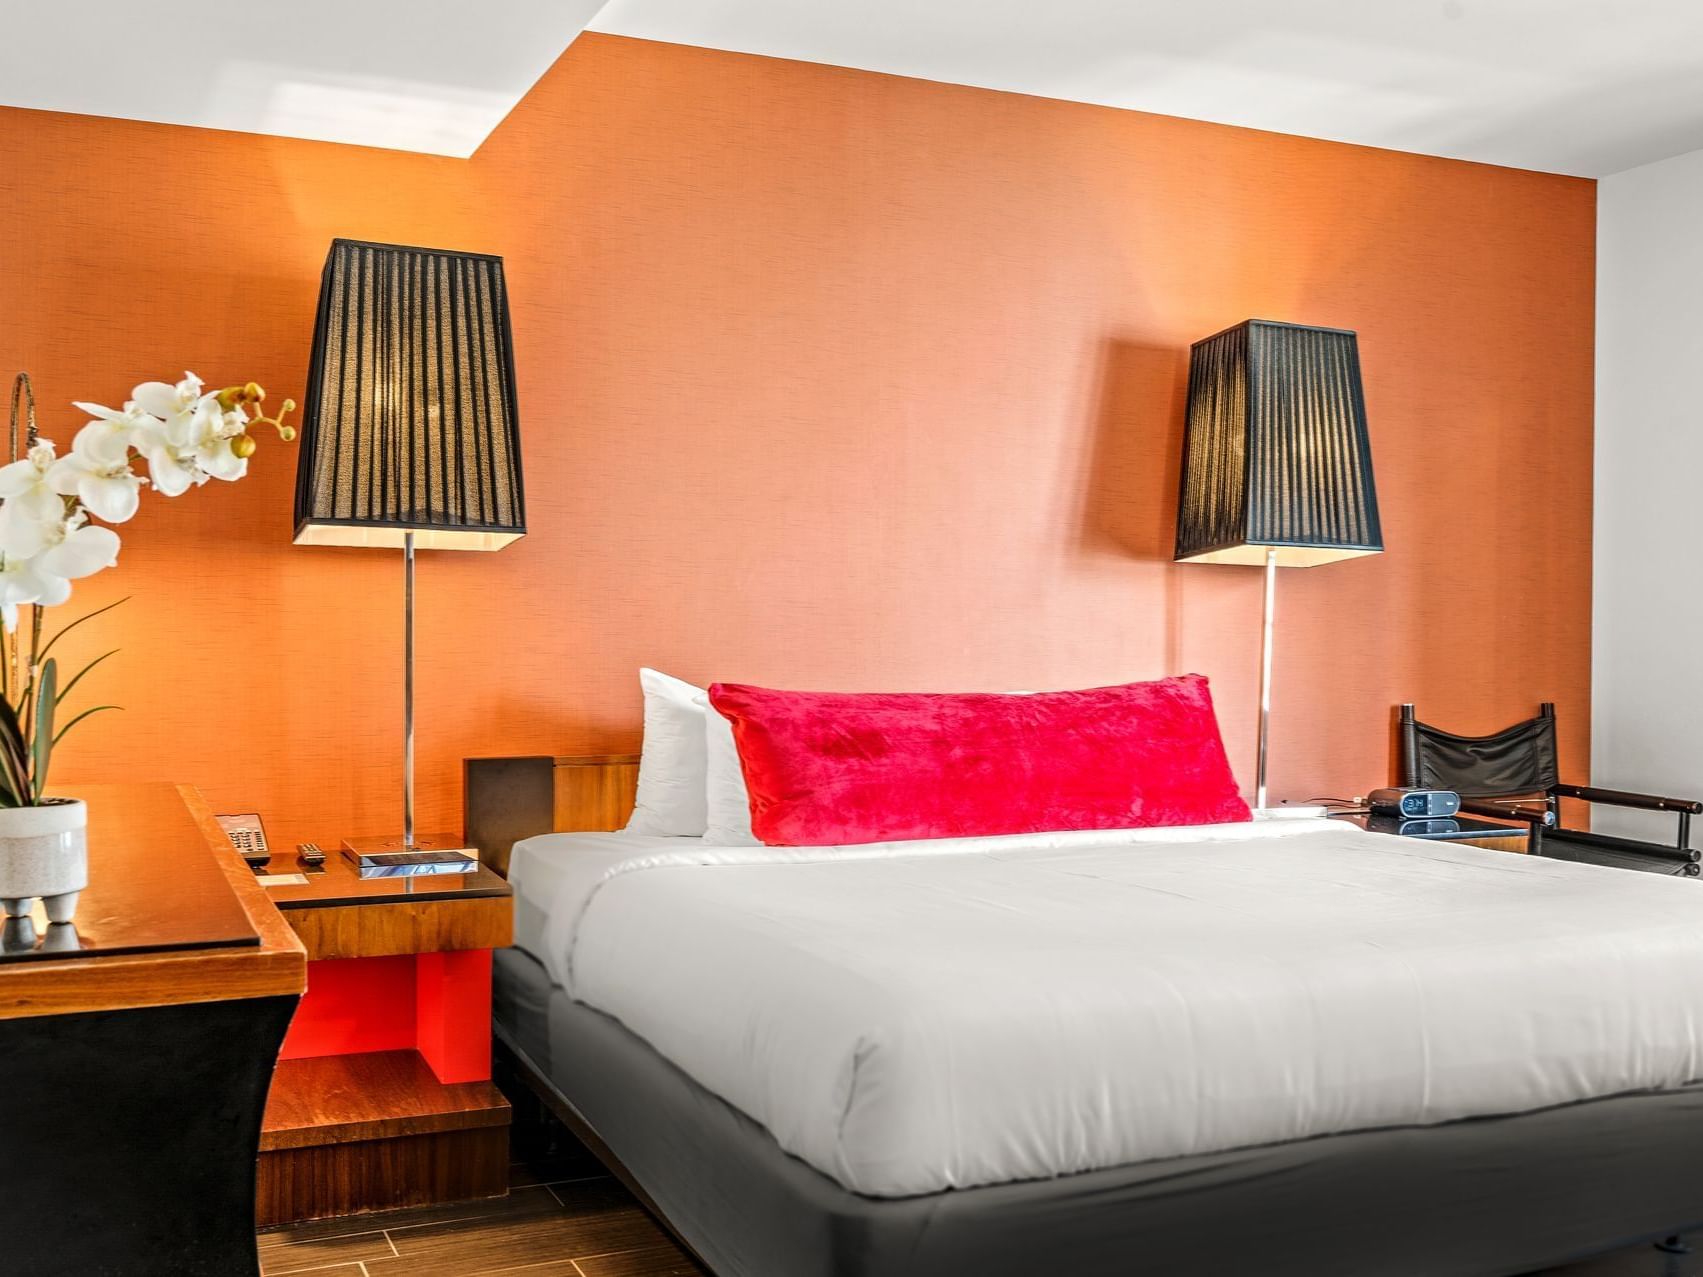 King-size bed with nightstands in Deluxe King at Fairwind Hotel Miami